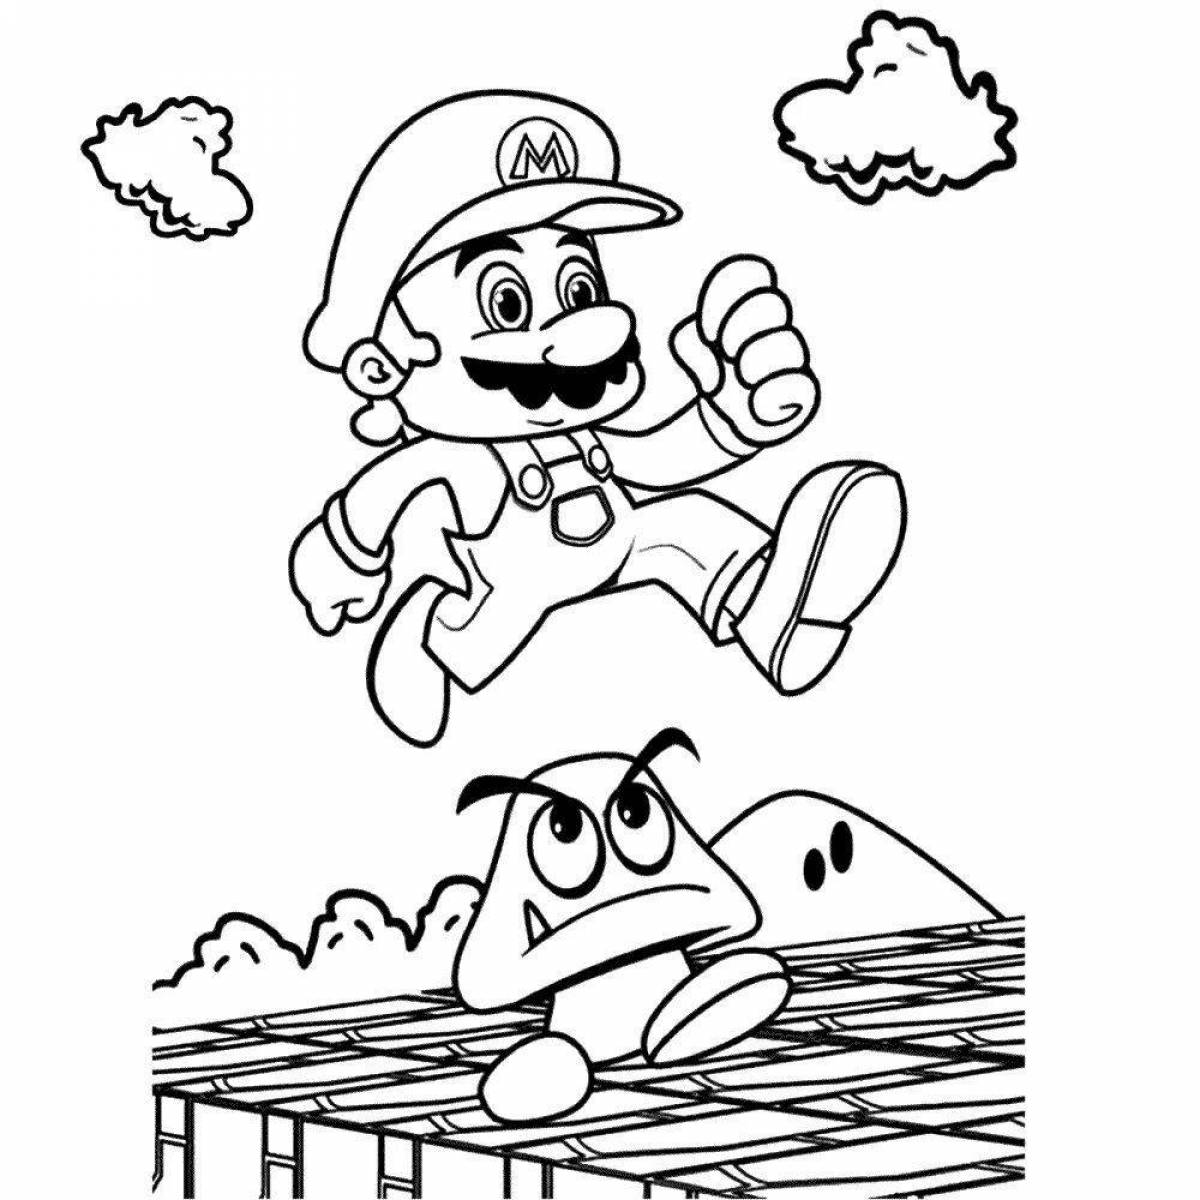 Mario by numbers #3